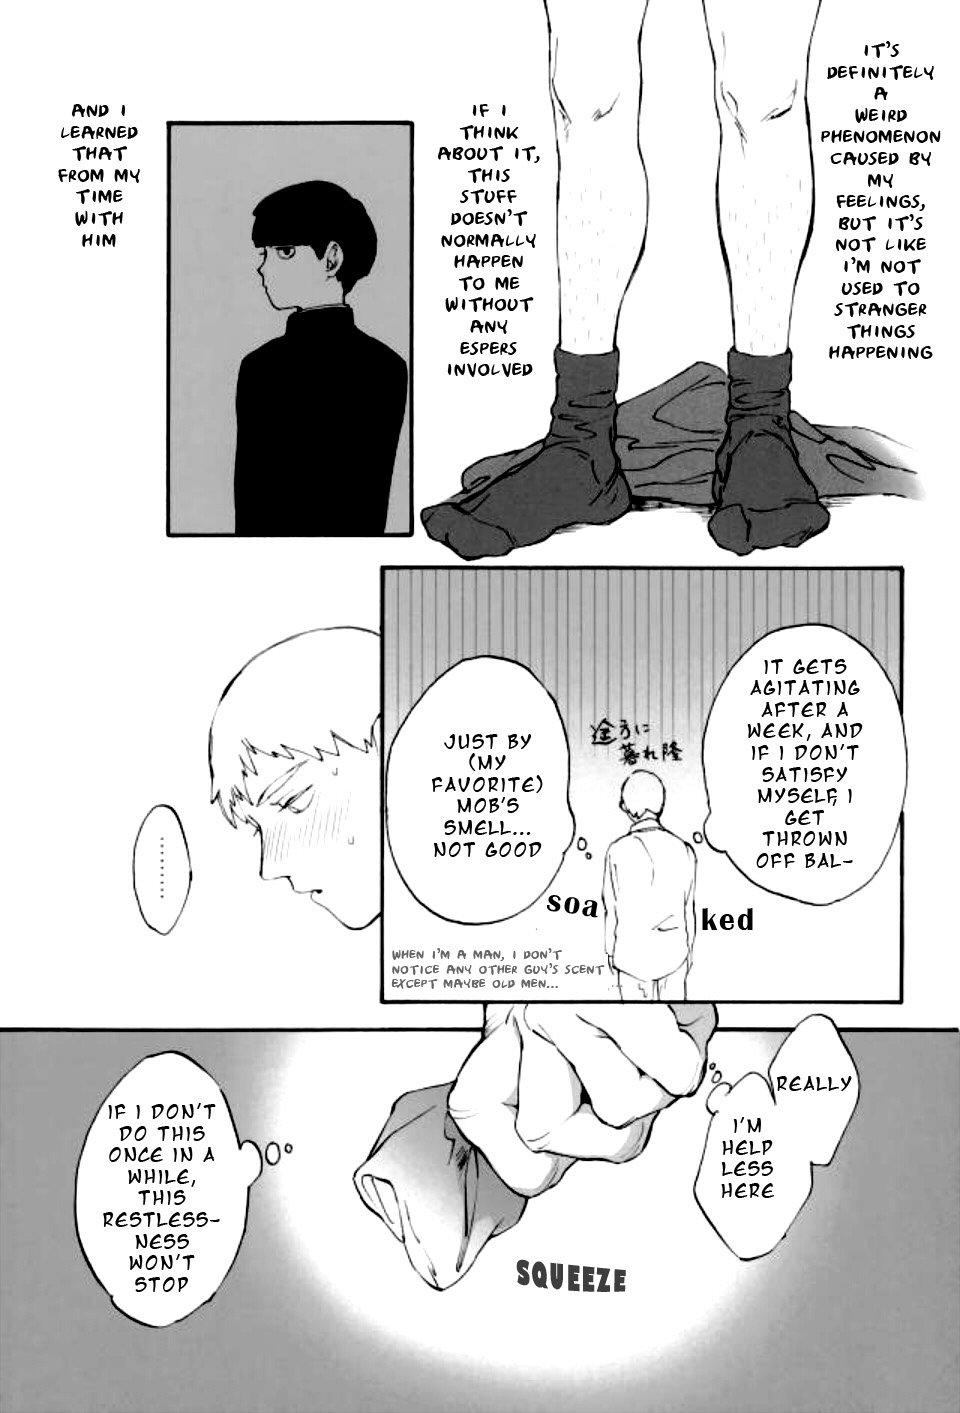 Amature Sex Tapes feel good - Mob psycho 100 Delicia - Page 10